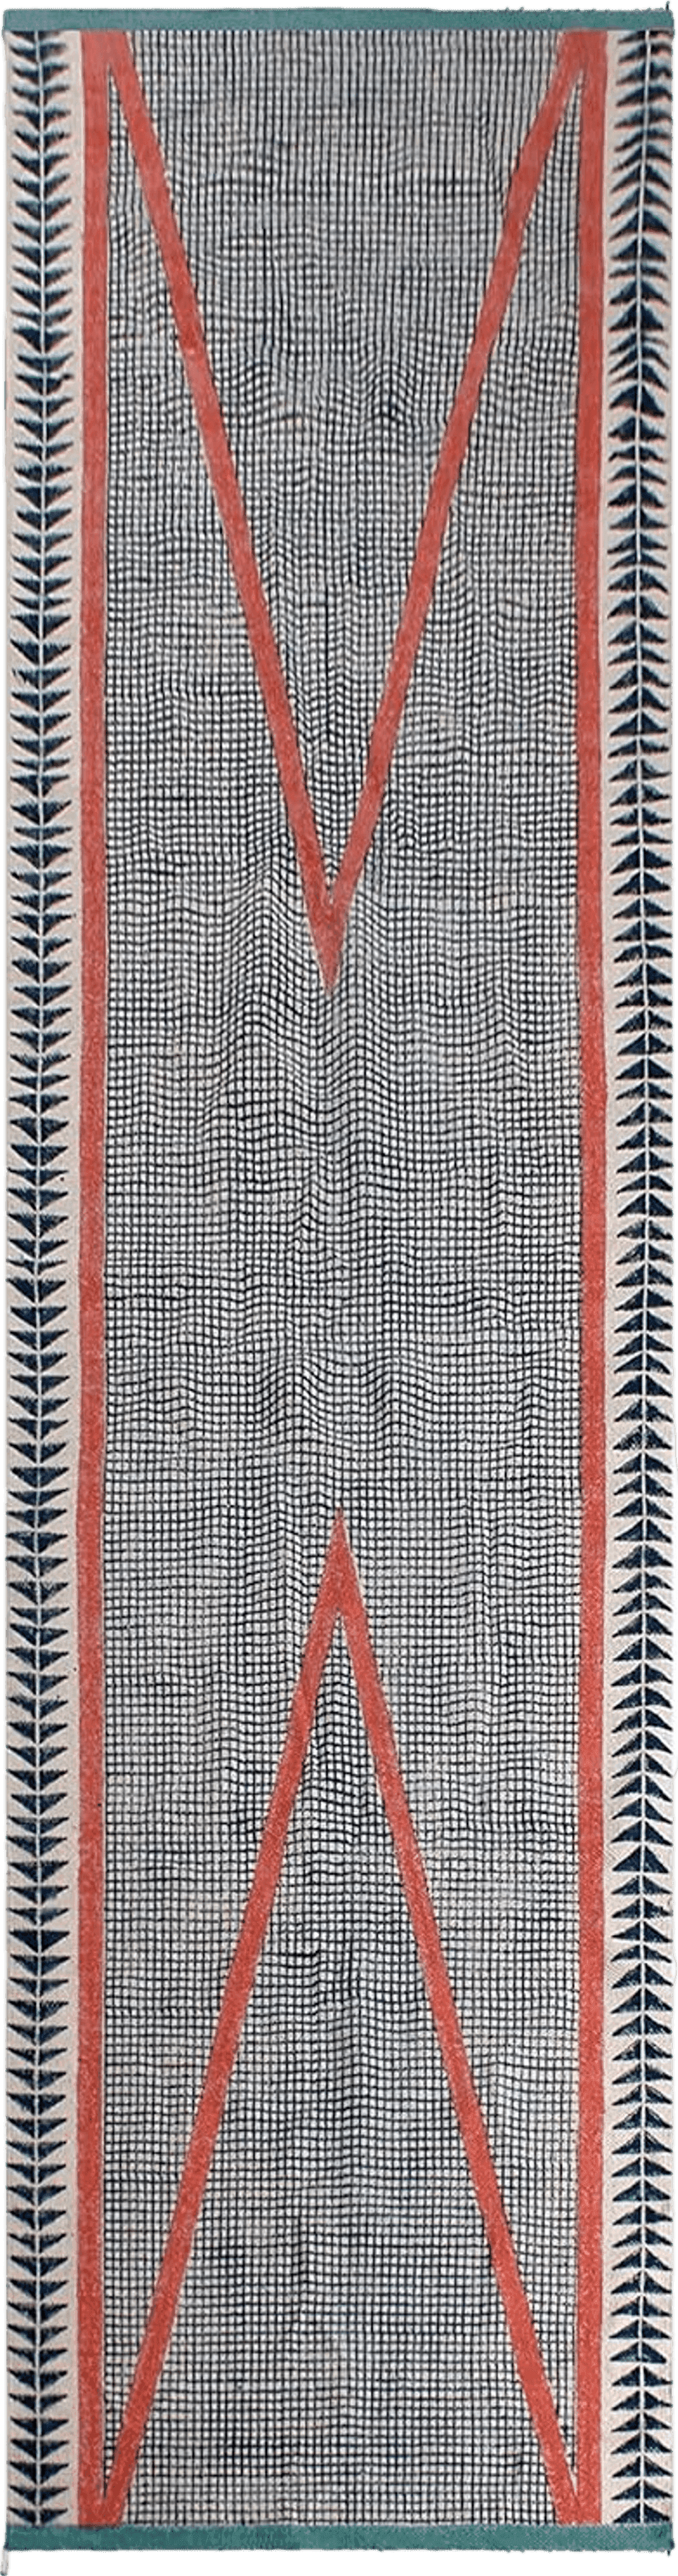 Outdoor All Rounds/Square CASAVANI Hand Block Printed Area Rug - 3x3 Feet Blue & Pink Pattarn Cotton Dhurrie Geometric Kilim Rug Indoor Outdoor Use Carpet Flatweave Rugs for Bedroom Bedside Custom Mat Dining Table Mat